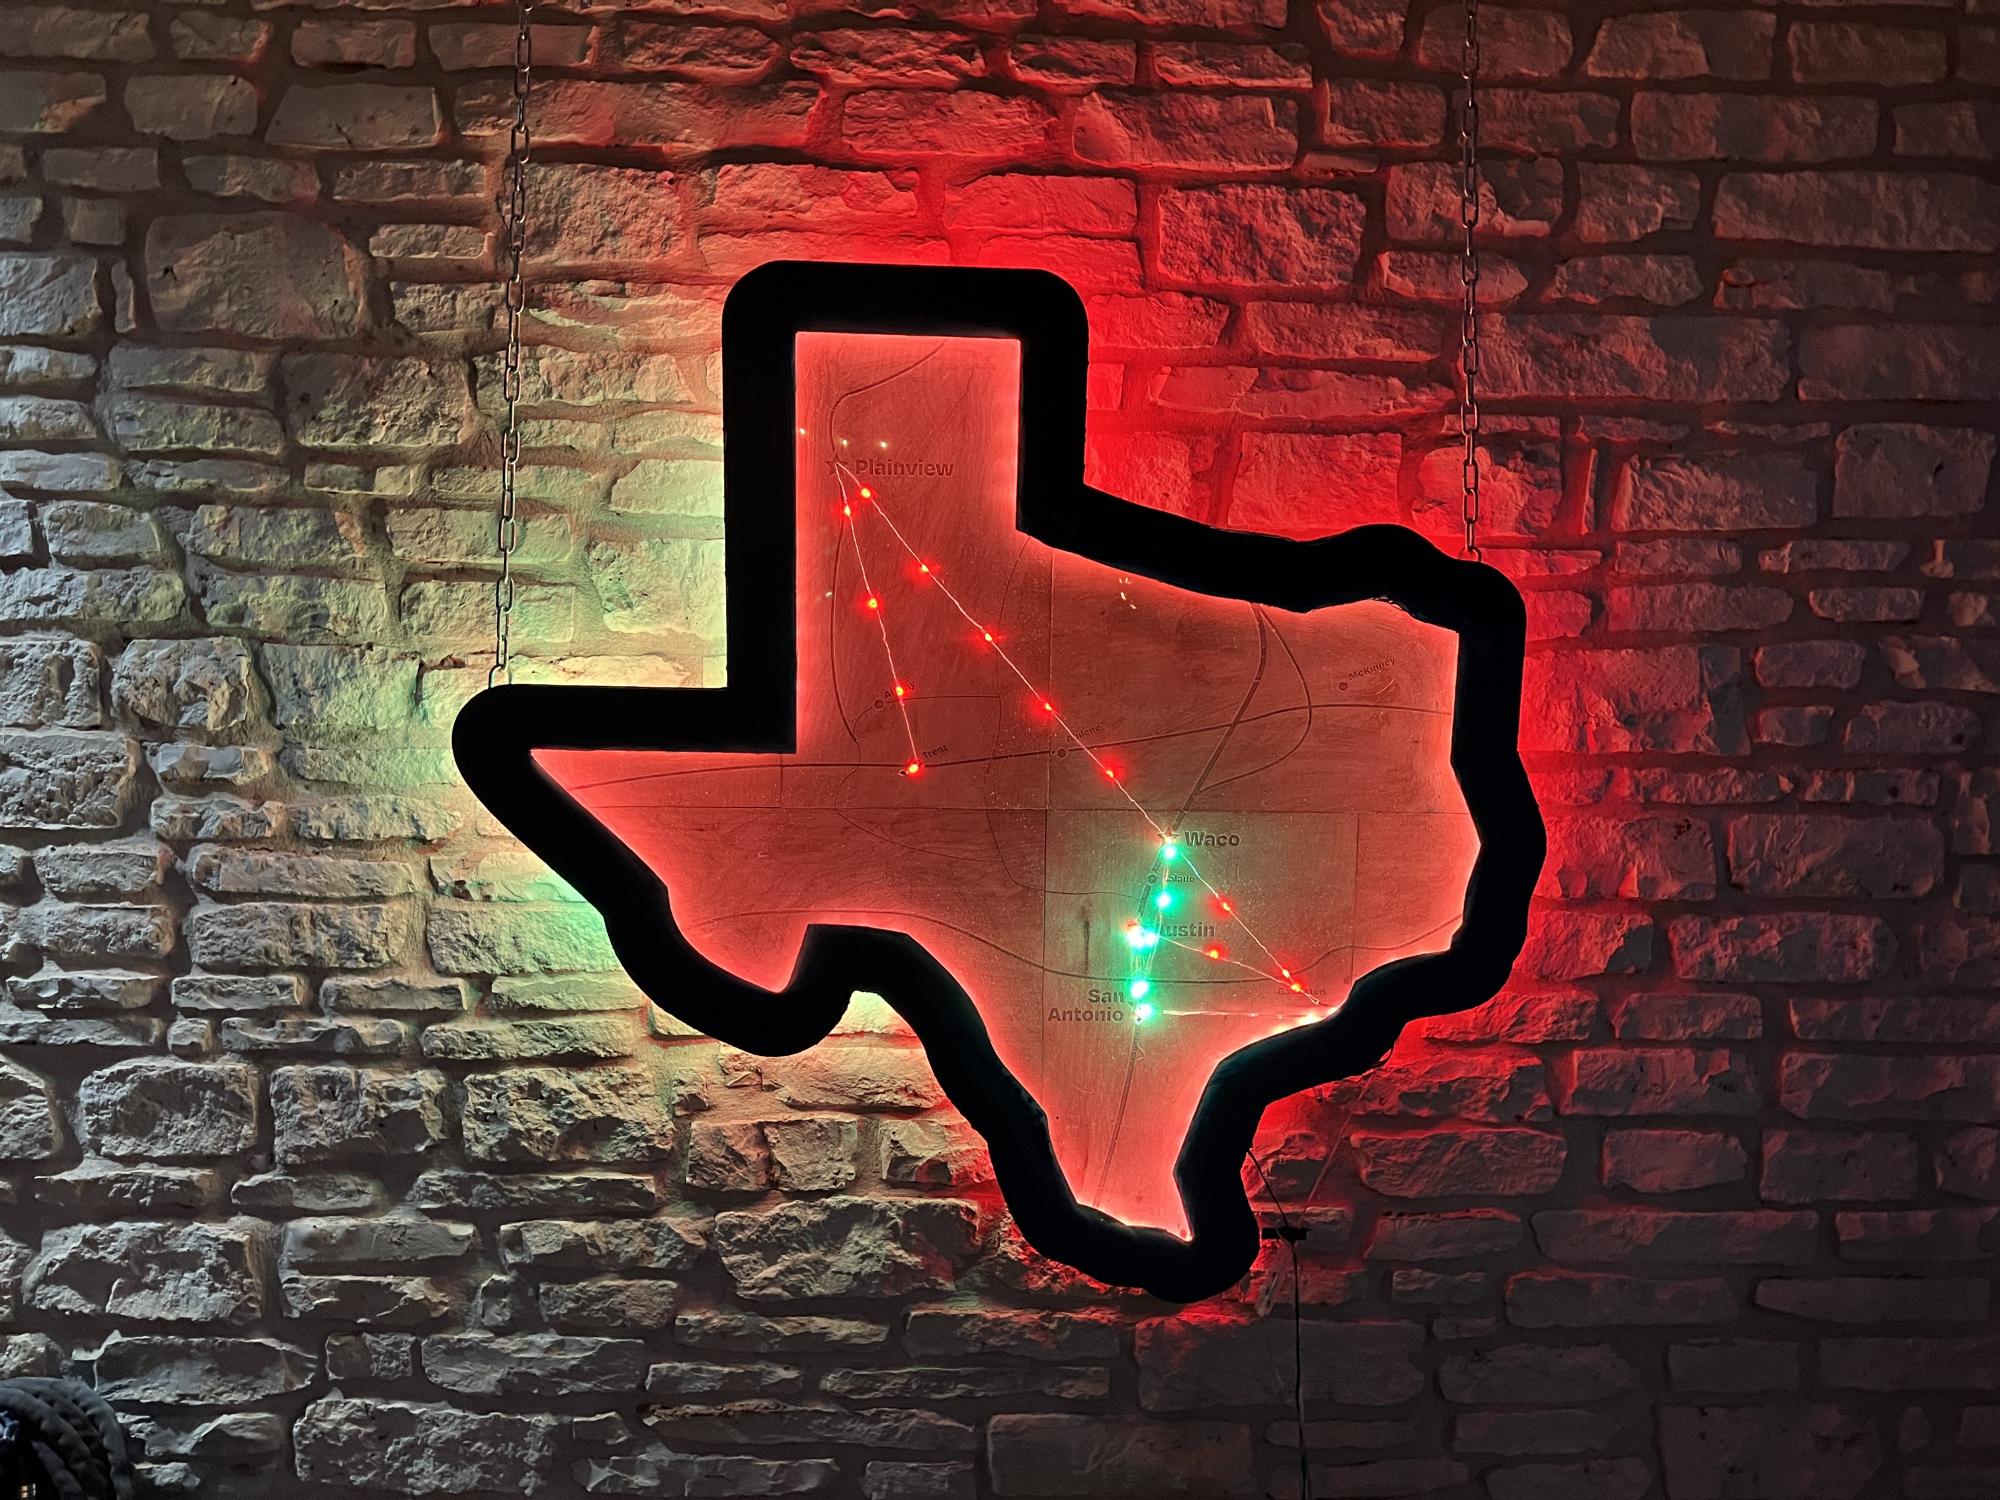 Image of LED-lighted wood cutout of Texas create by undergrad Design student for Jose Perez' Objects and Spaces class